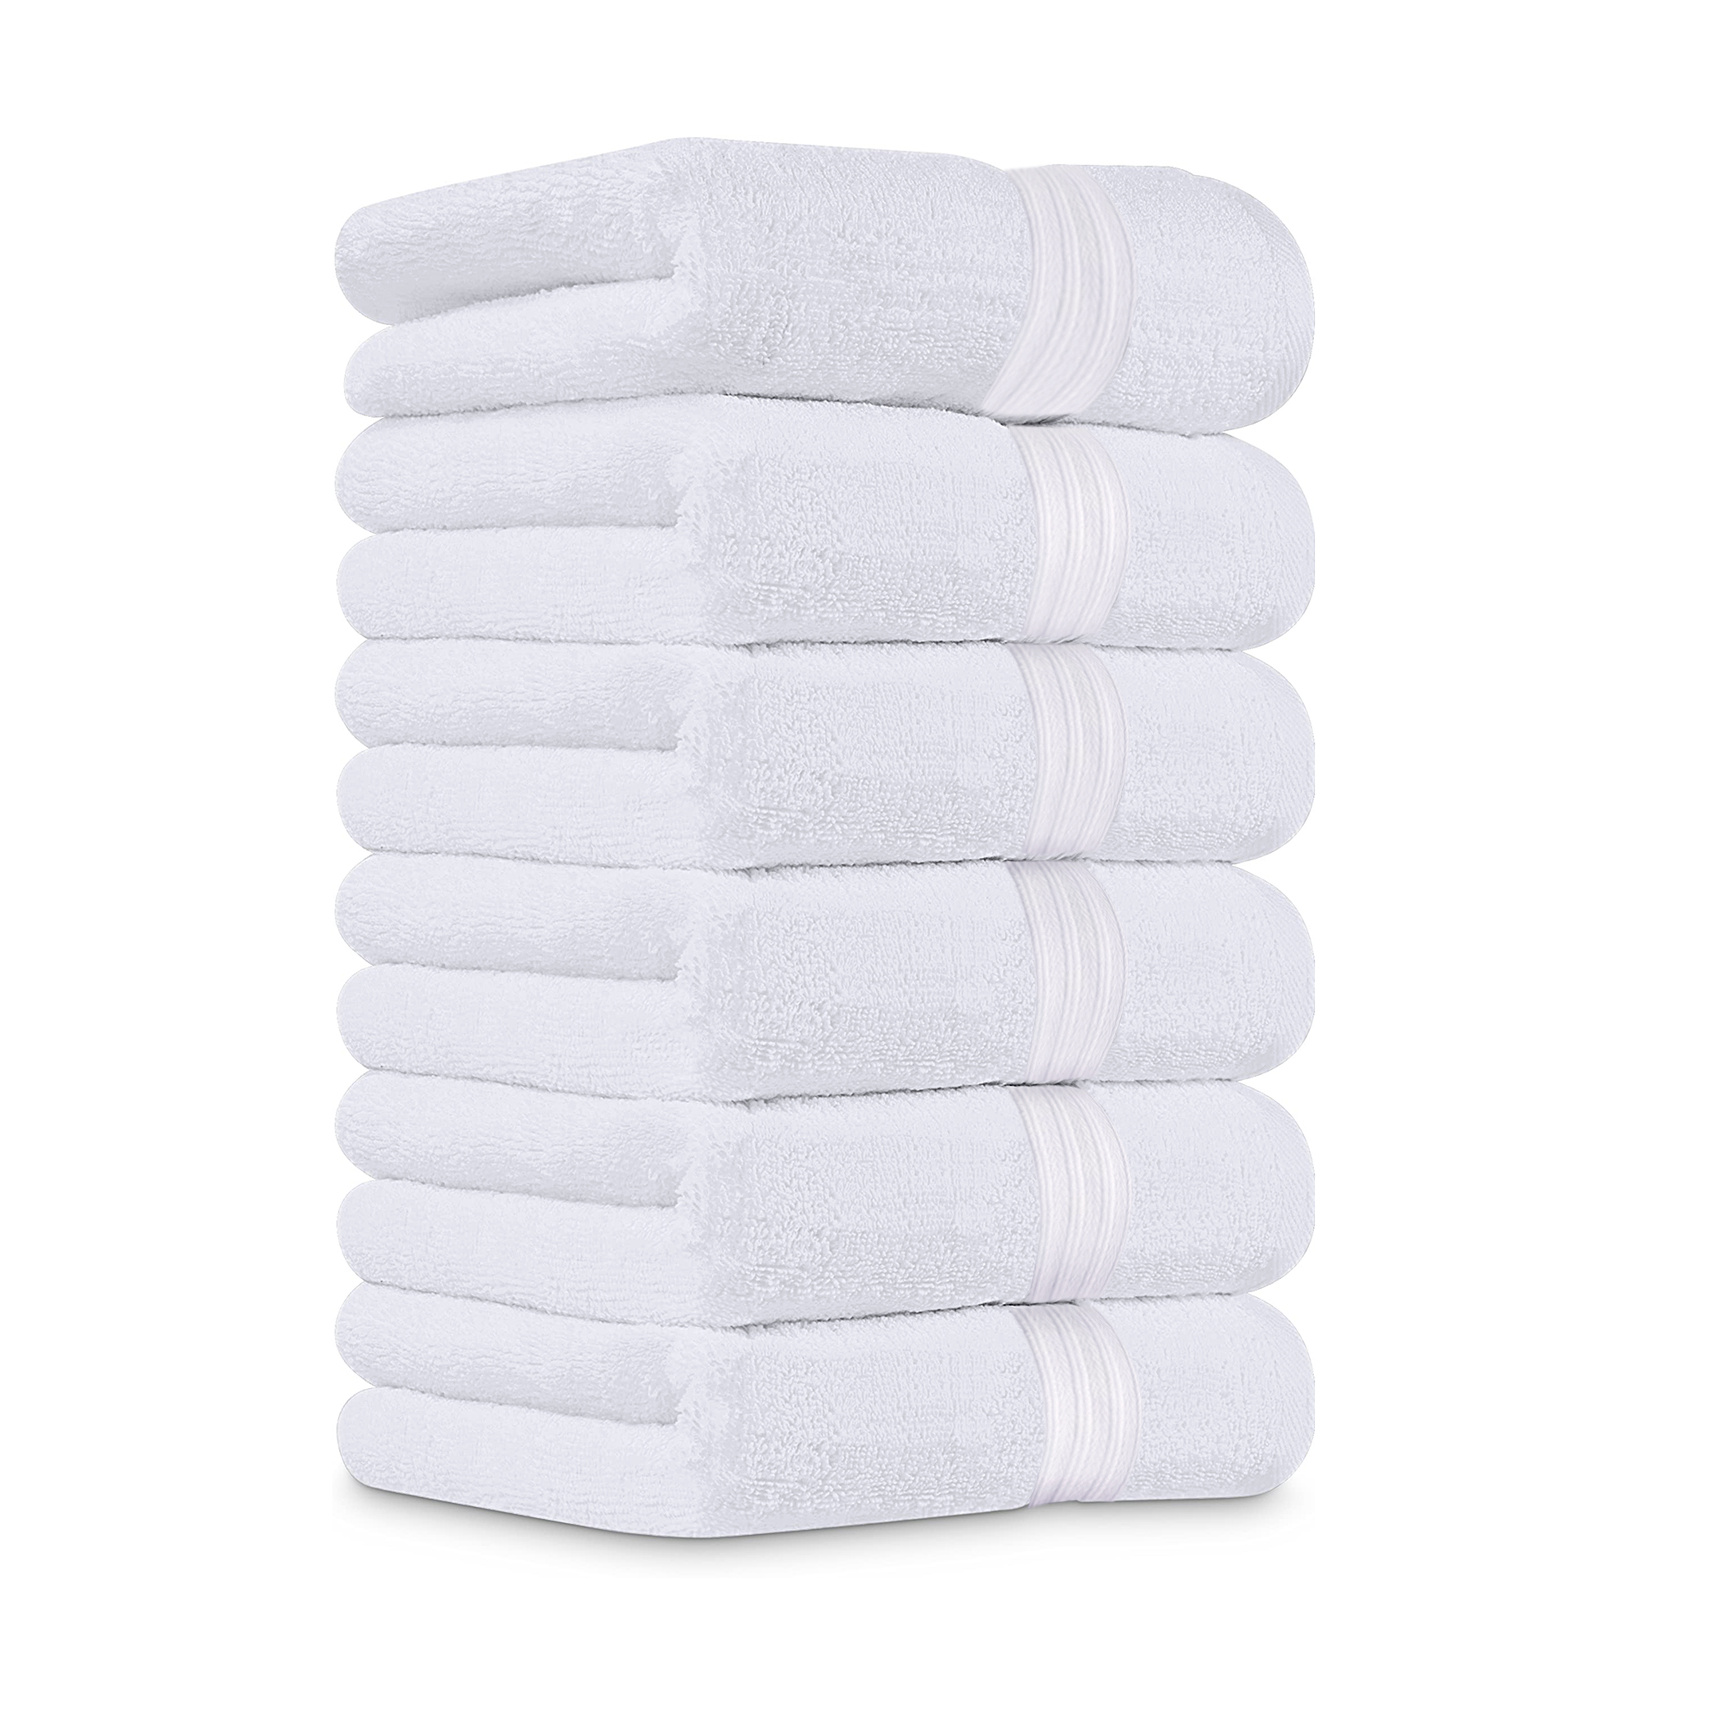 6pack Cotton Bath Towels for Bathroom Extra Large Absorbent Spa